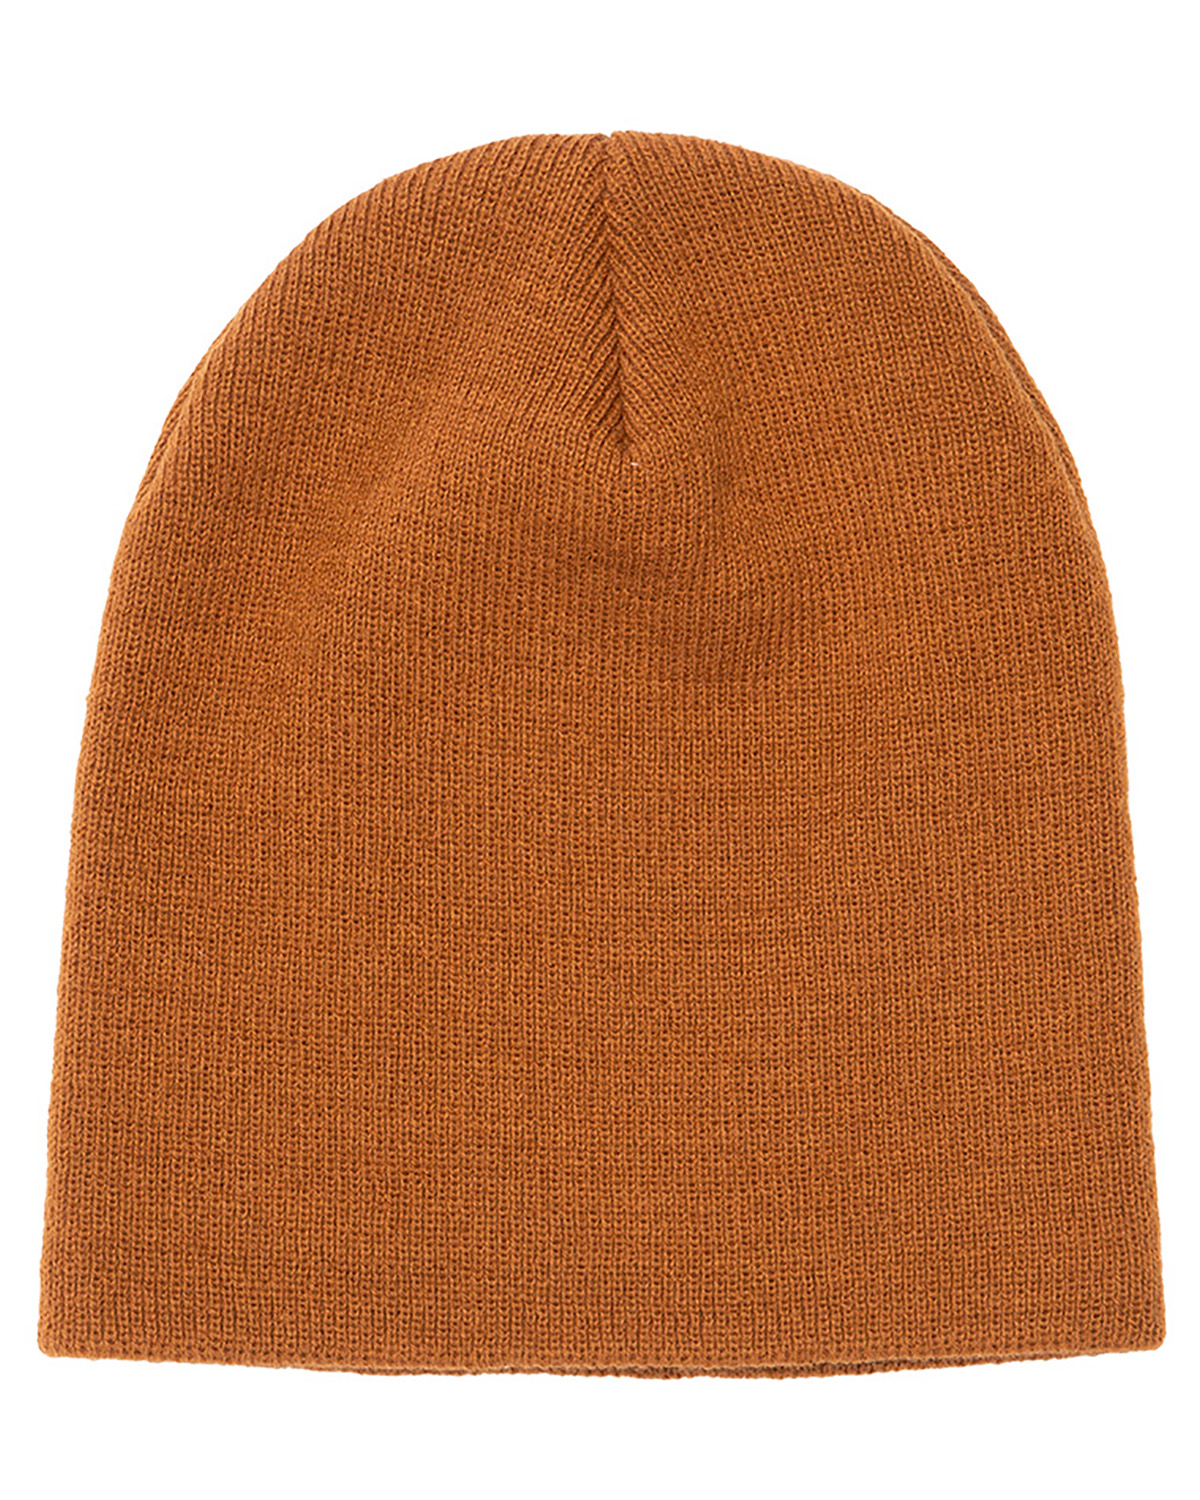 Yupoong 1500 | Adult Knit | ShirtSpace Beanie